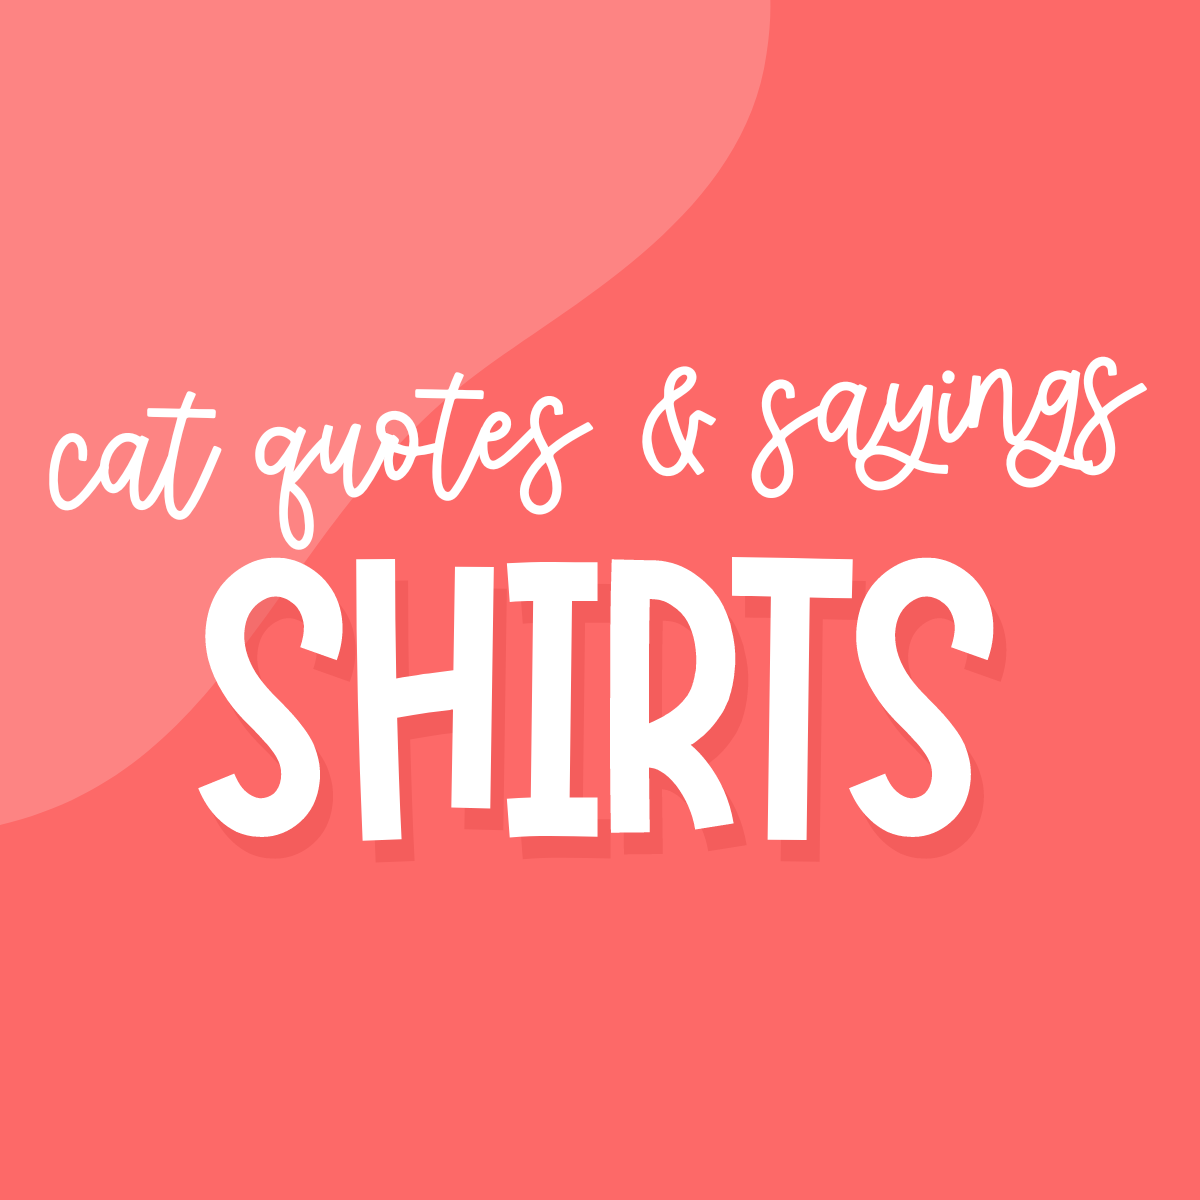 Cat Quotes & Sayings Shirts